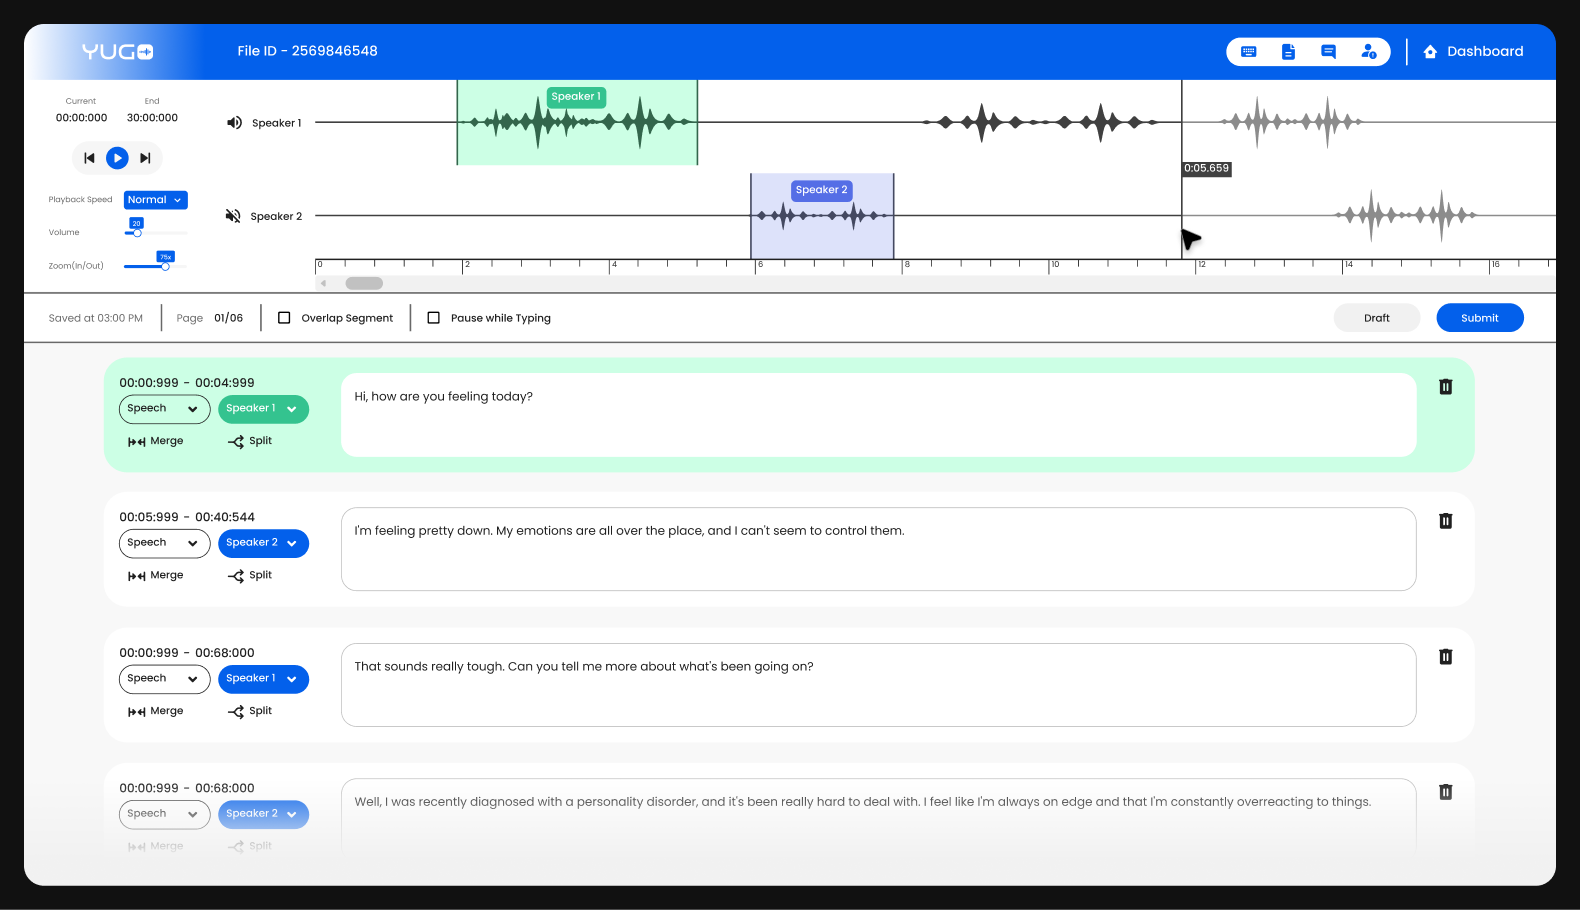 FutureBeeAI's Yugo transcription web app is your go-to tool for accurate, reliable speech-to-text conversion. See a screenshot now!